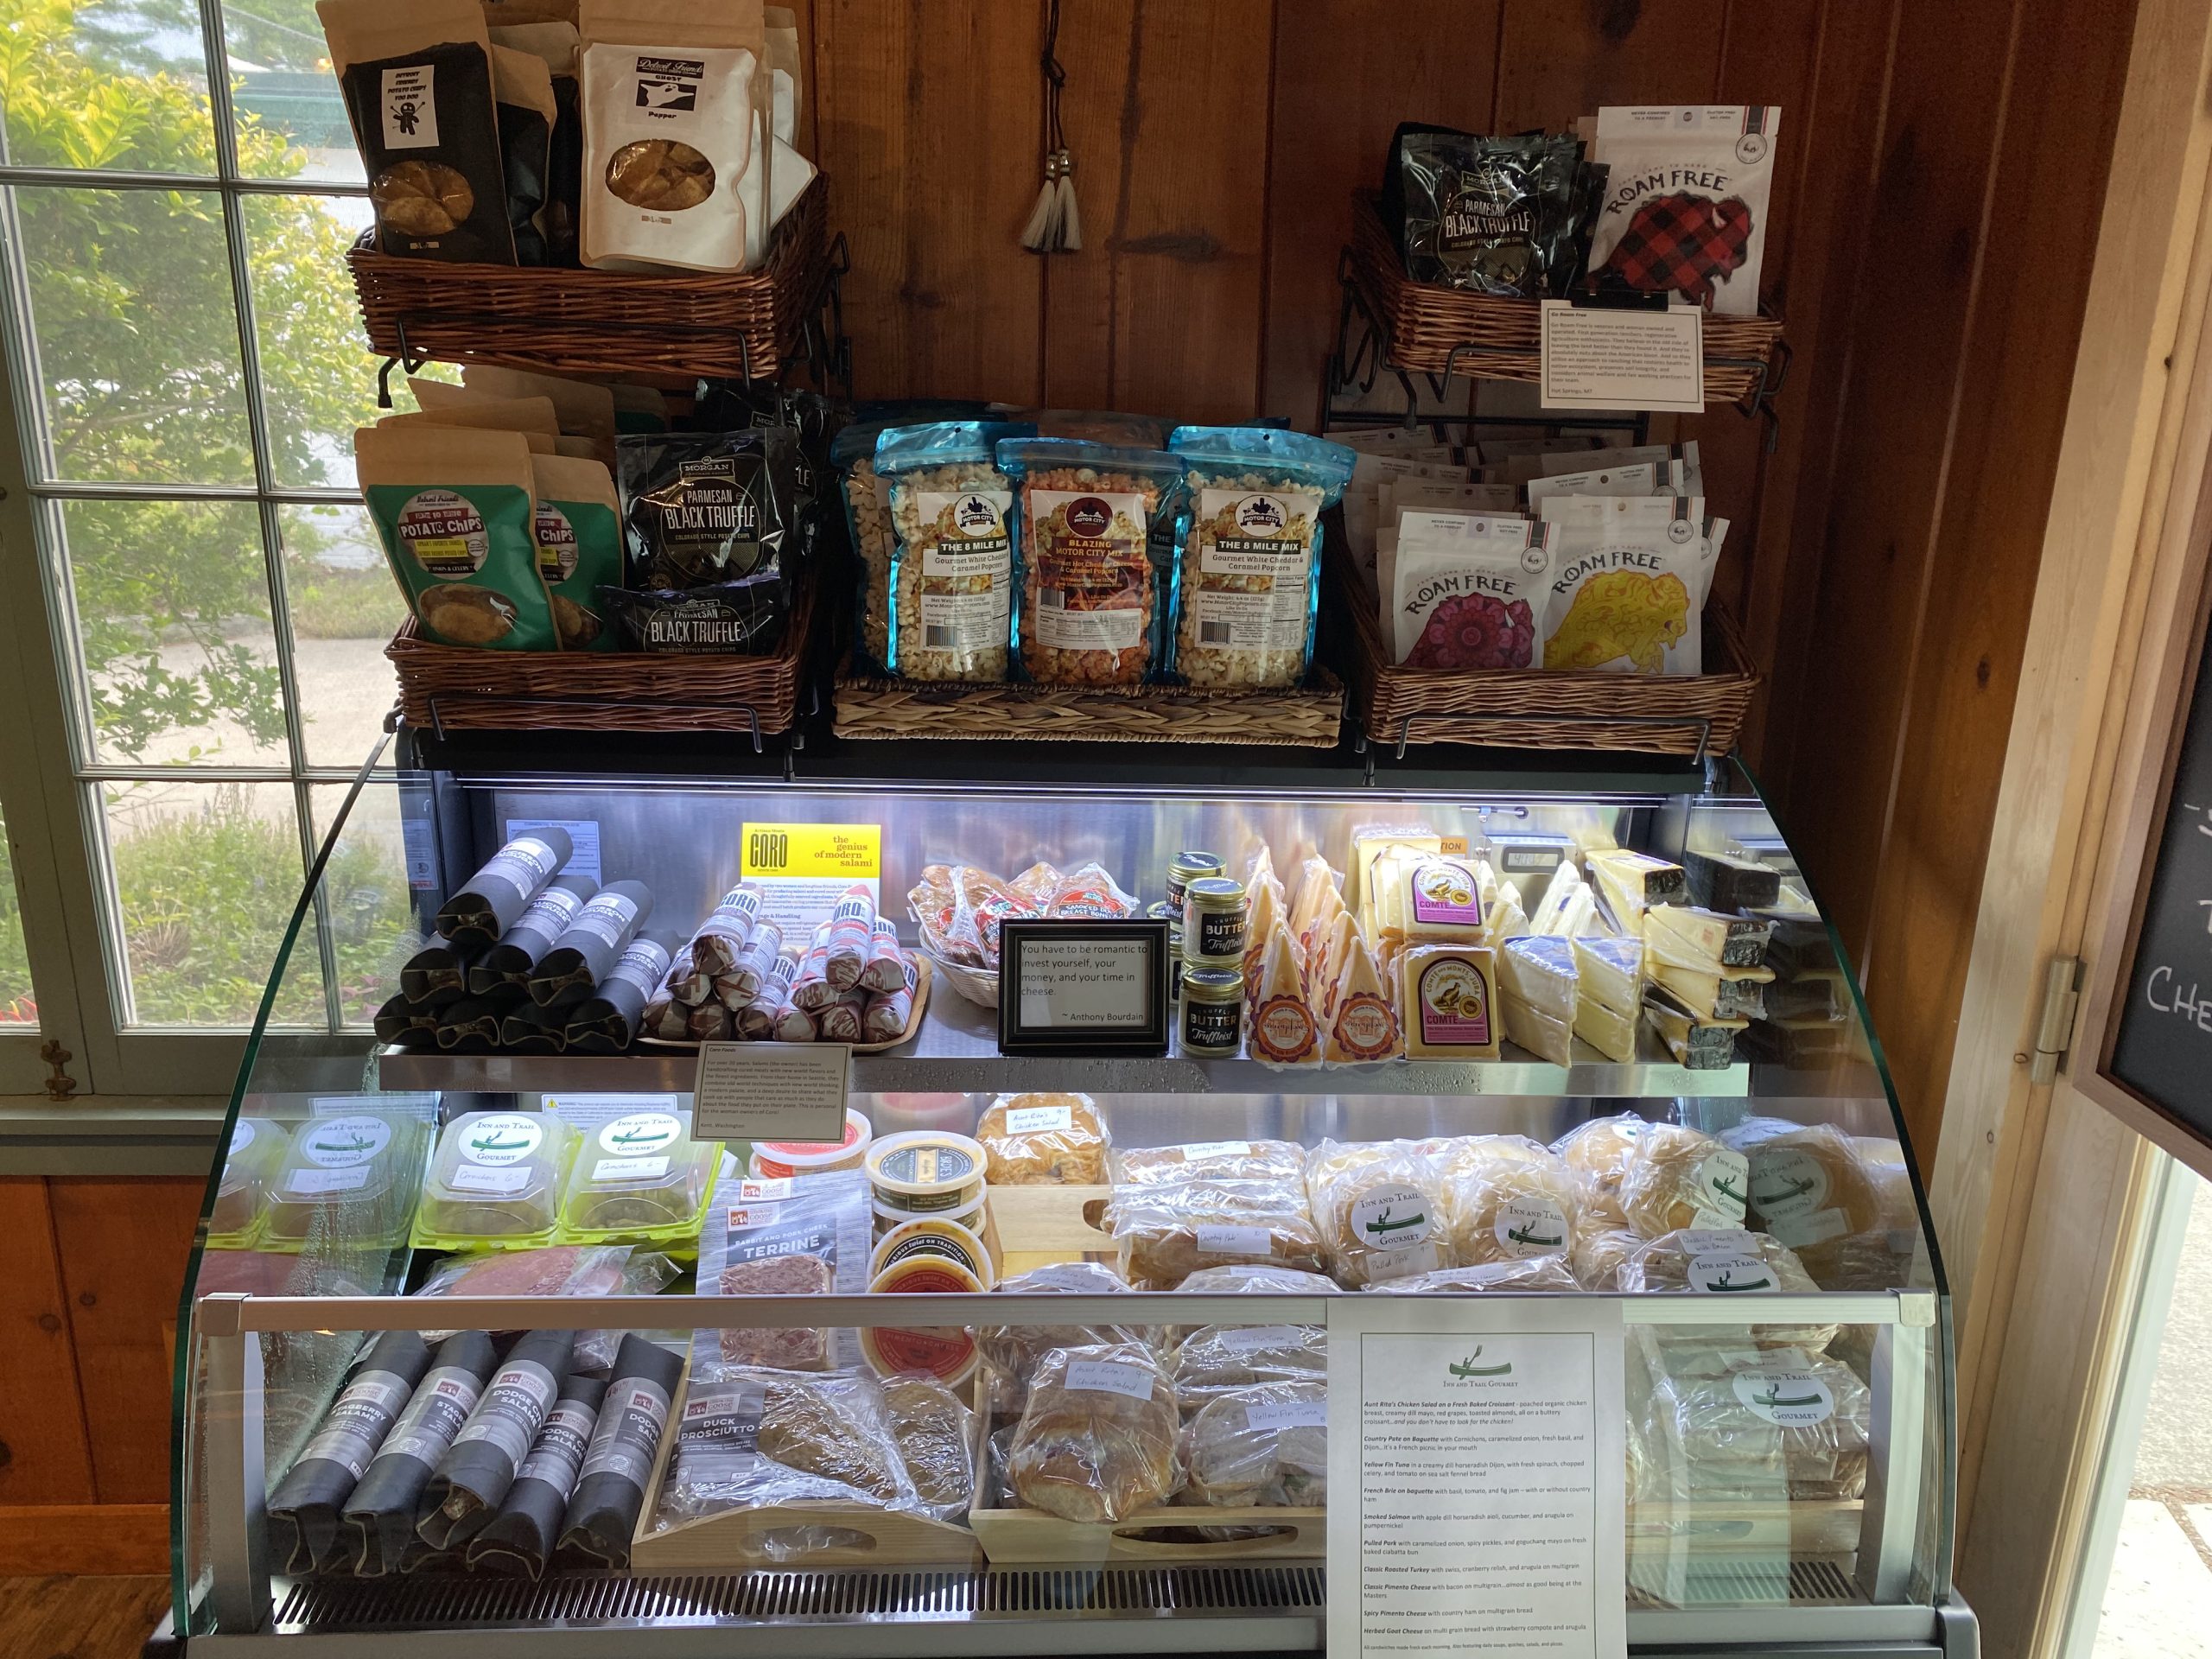 Inn and Trail gourmet inside display case